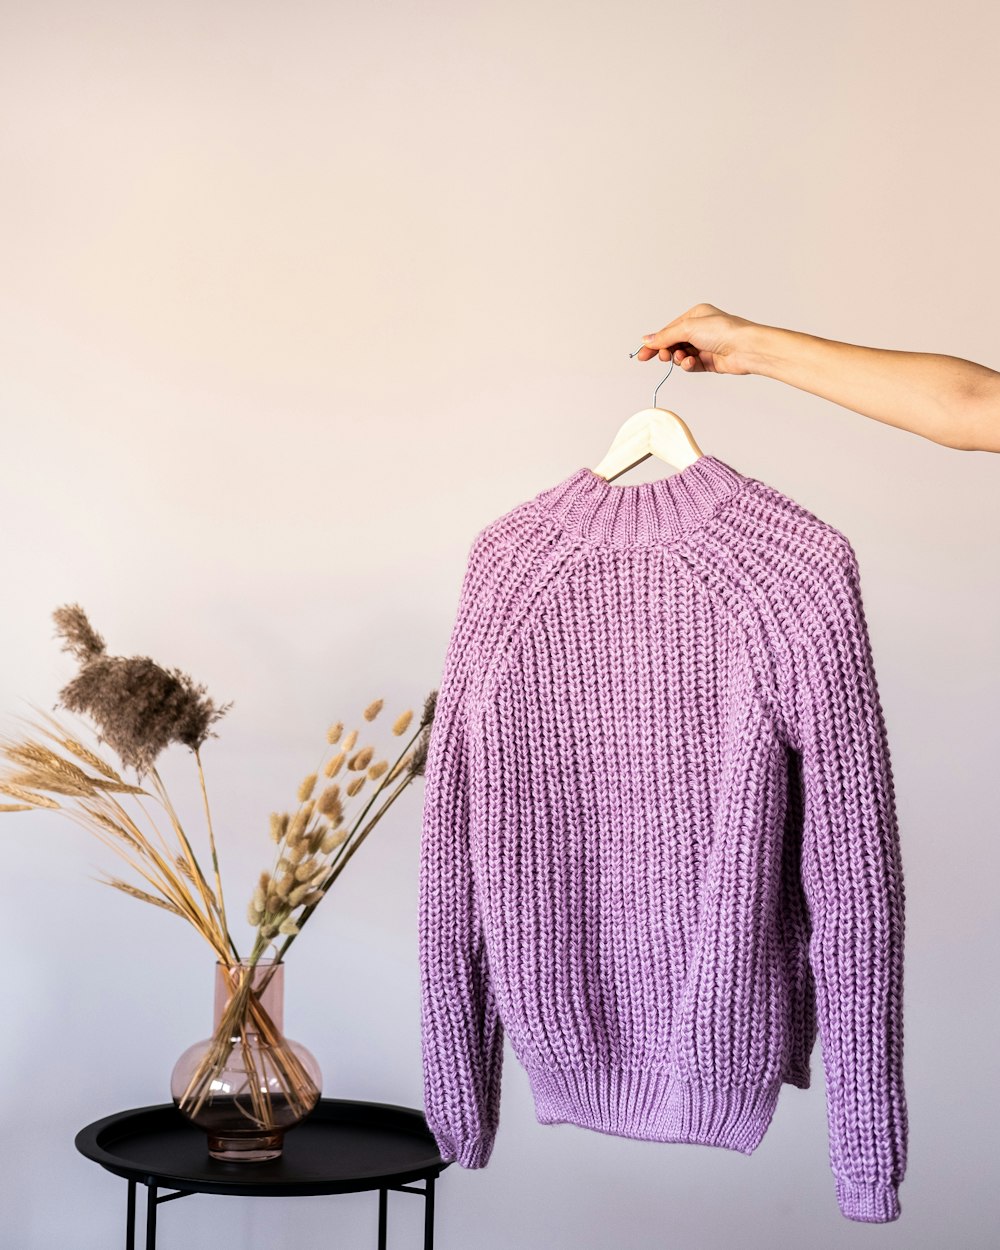 a purple sweater hanging on a rack next to a vase with dried flowers